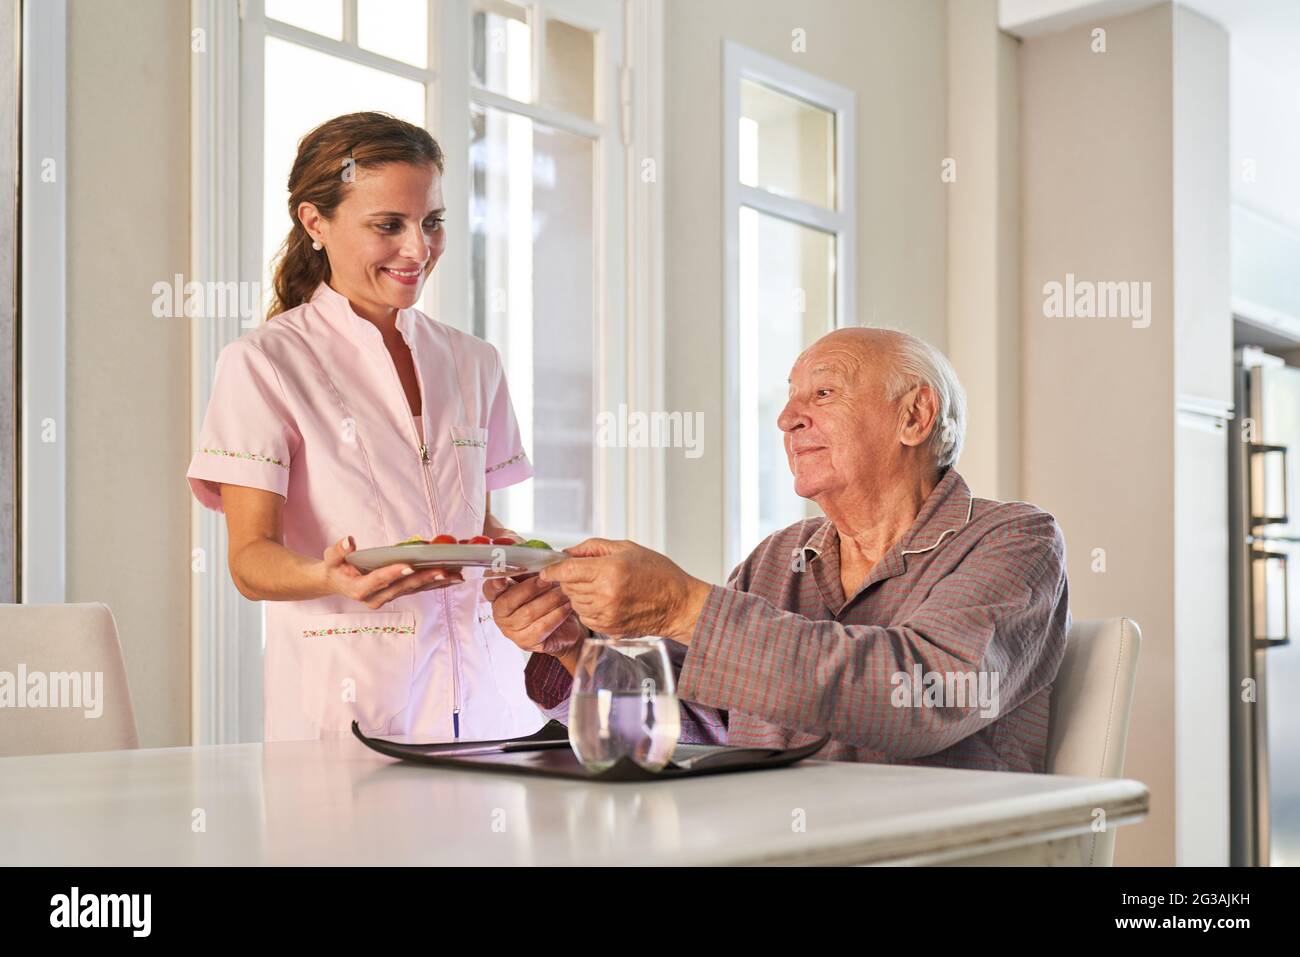 Senior has meals on wheels delivered to their homes by the delivery service Stock Photo